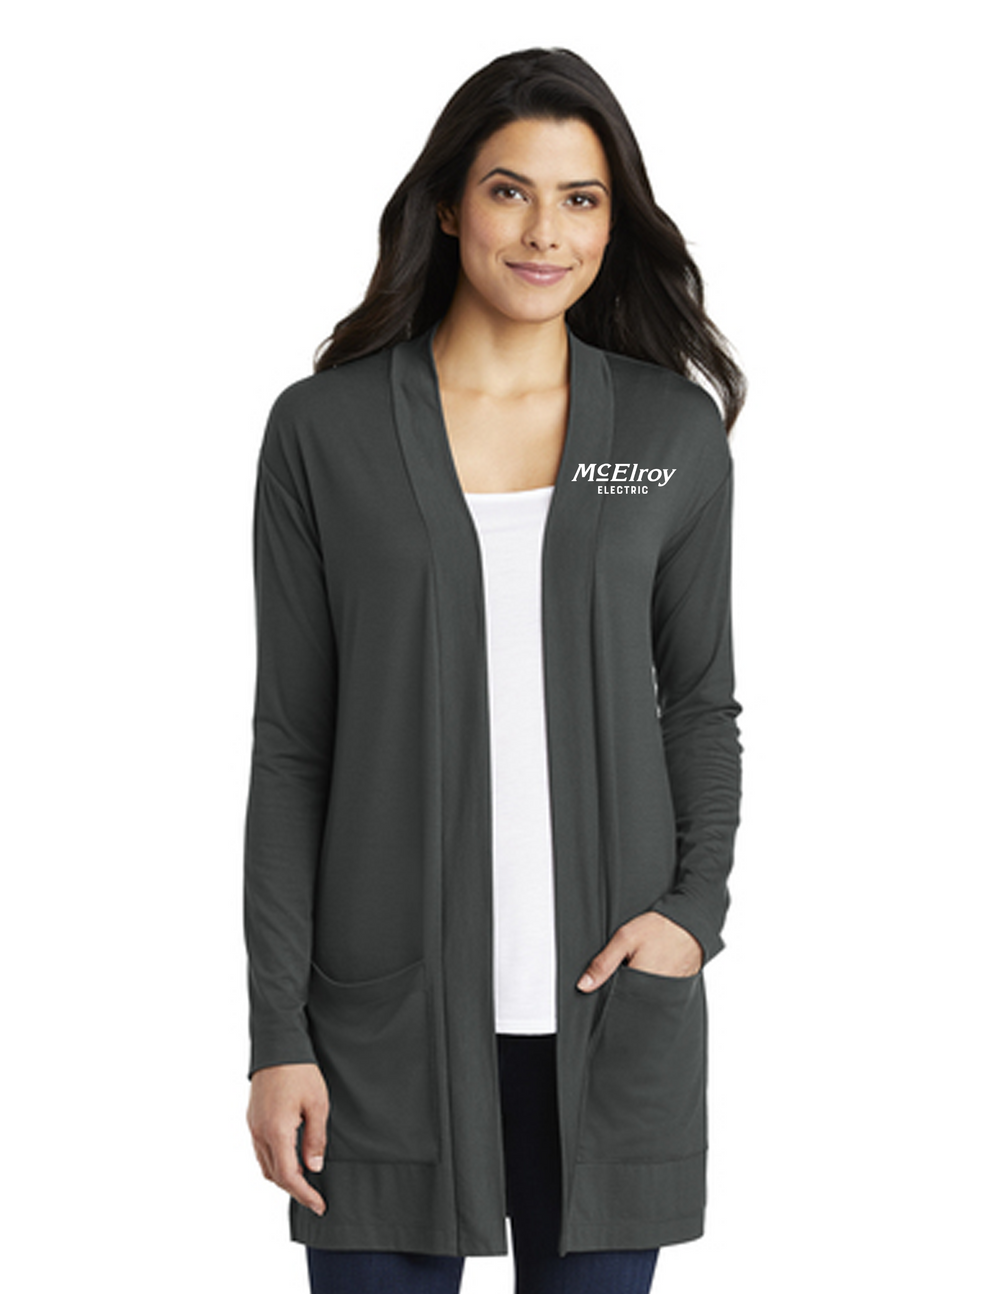 McElroy Electric - Port Authority Ladies Concept Long Pocket Cardigan - LK5434